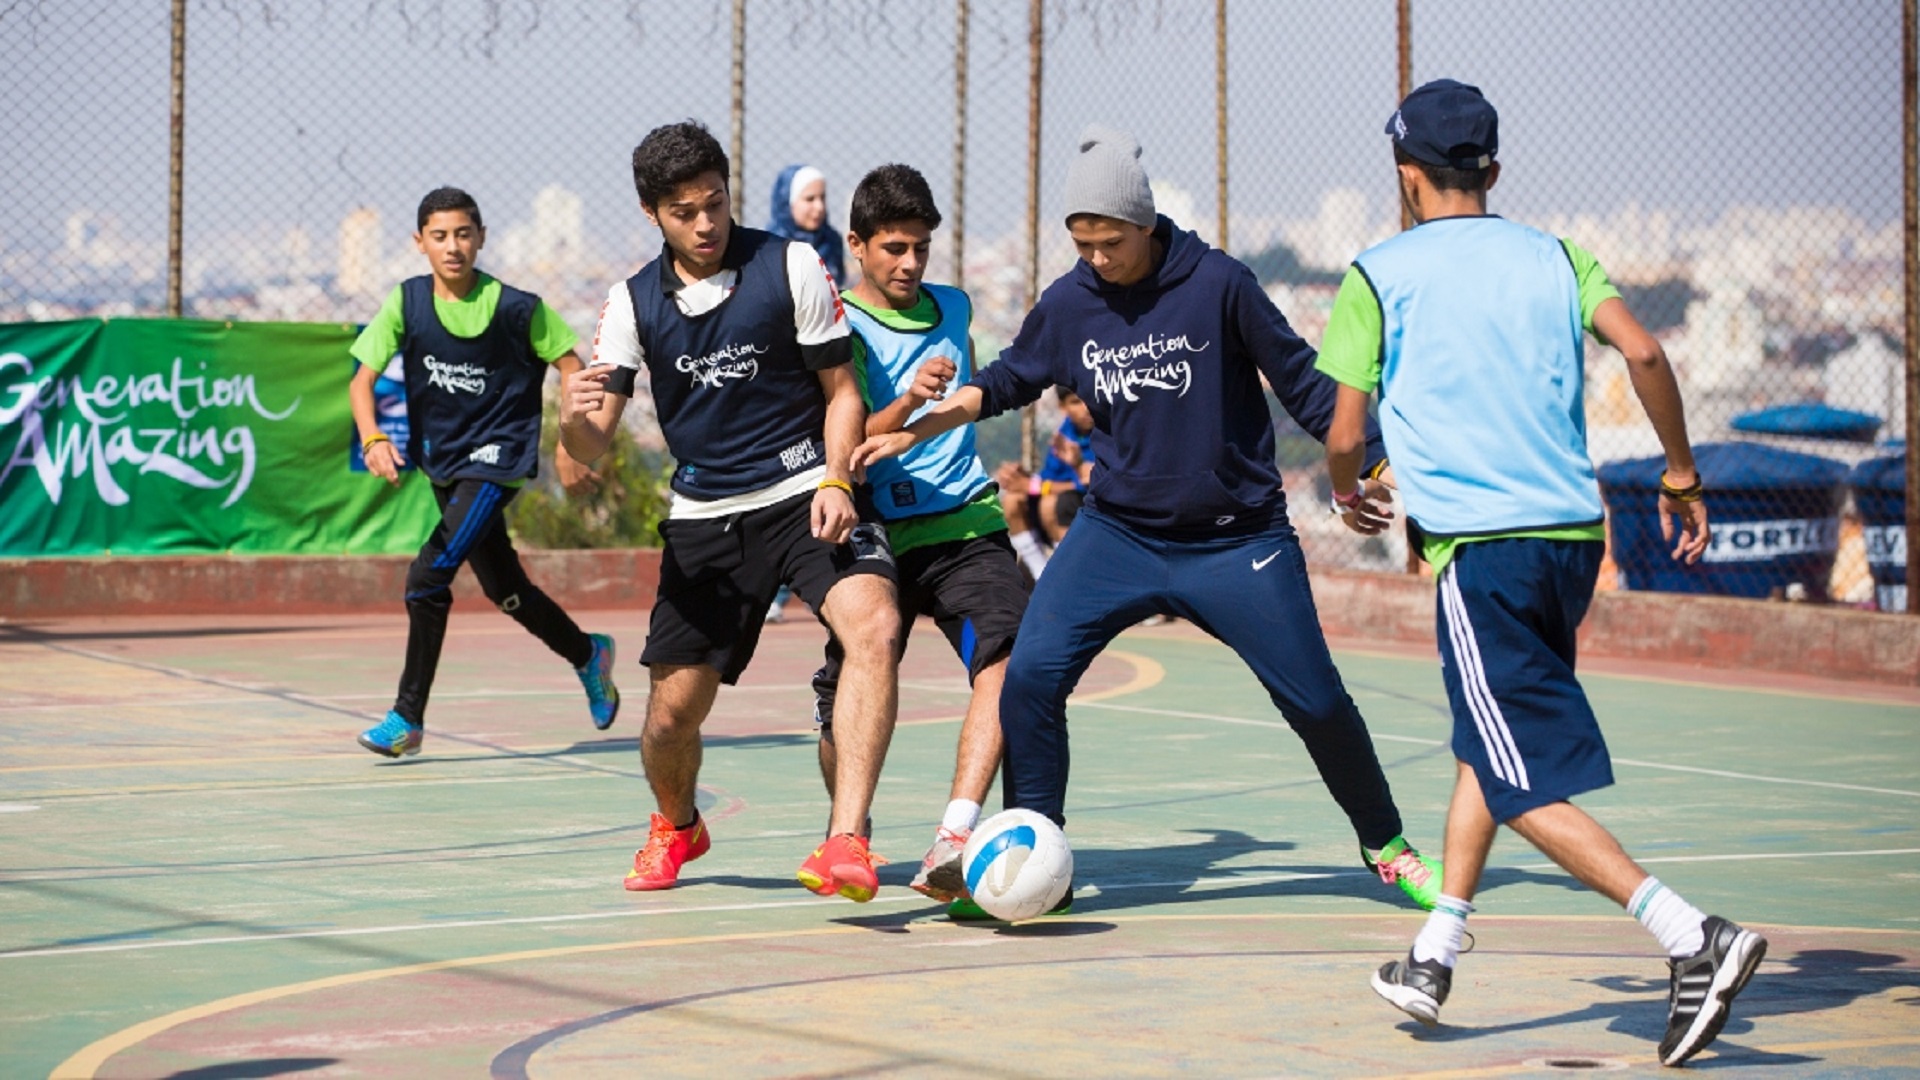 Generation Amazing Reaches Significant Milestones with One Year to Go Until Qatar 2022